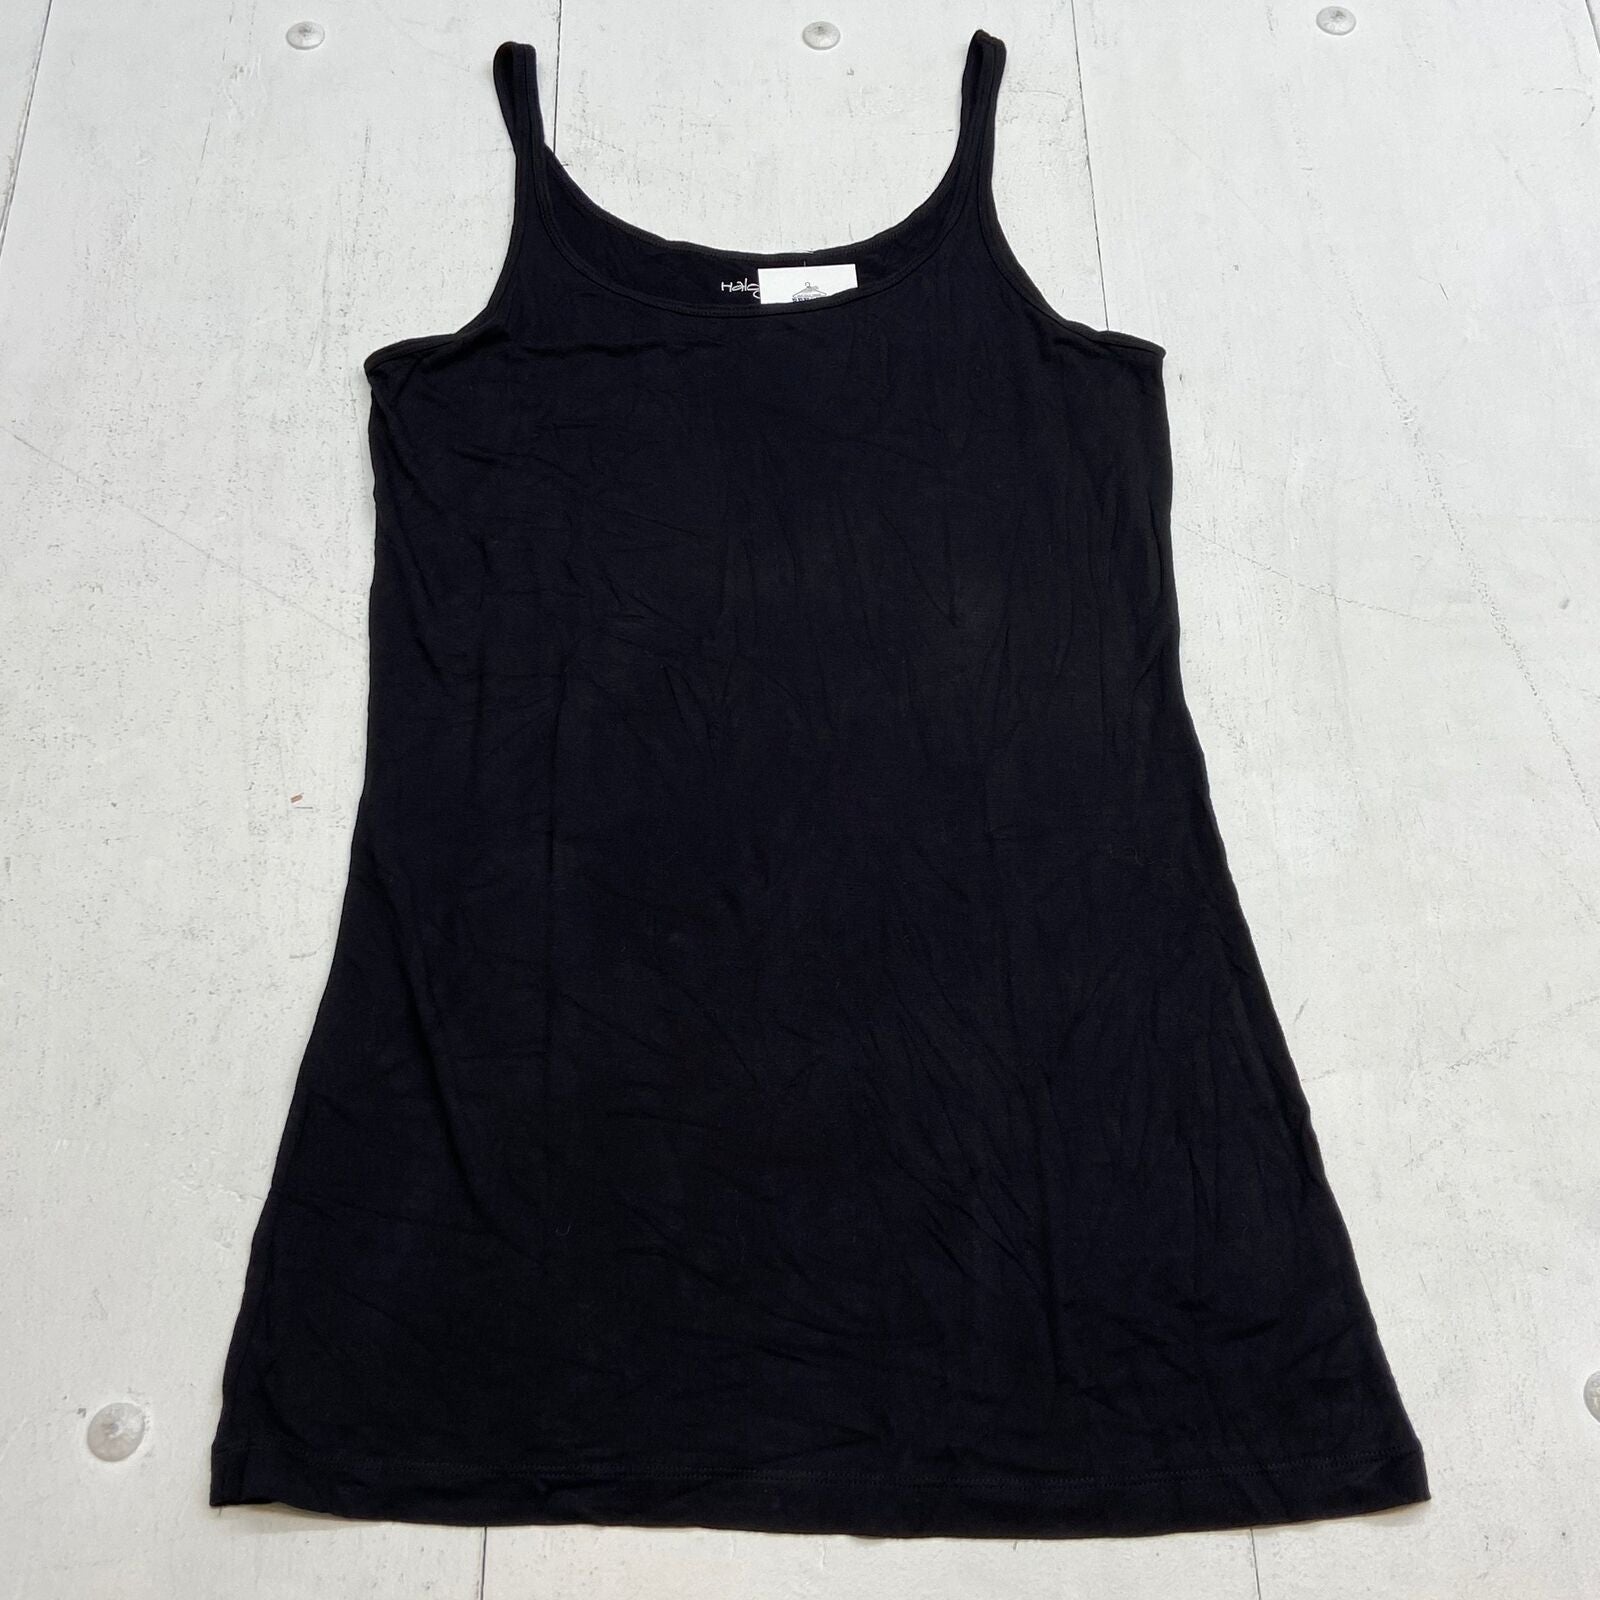 Halogen Black Sleeveless Fitted Cami Tank Top Women Size XL